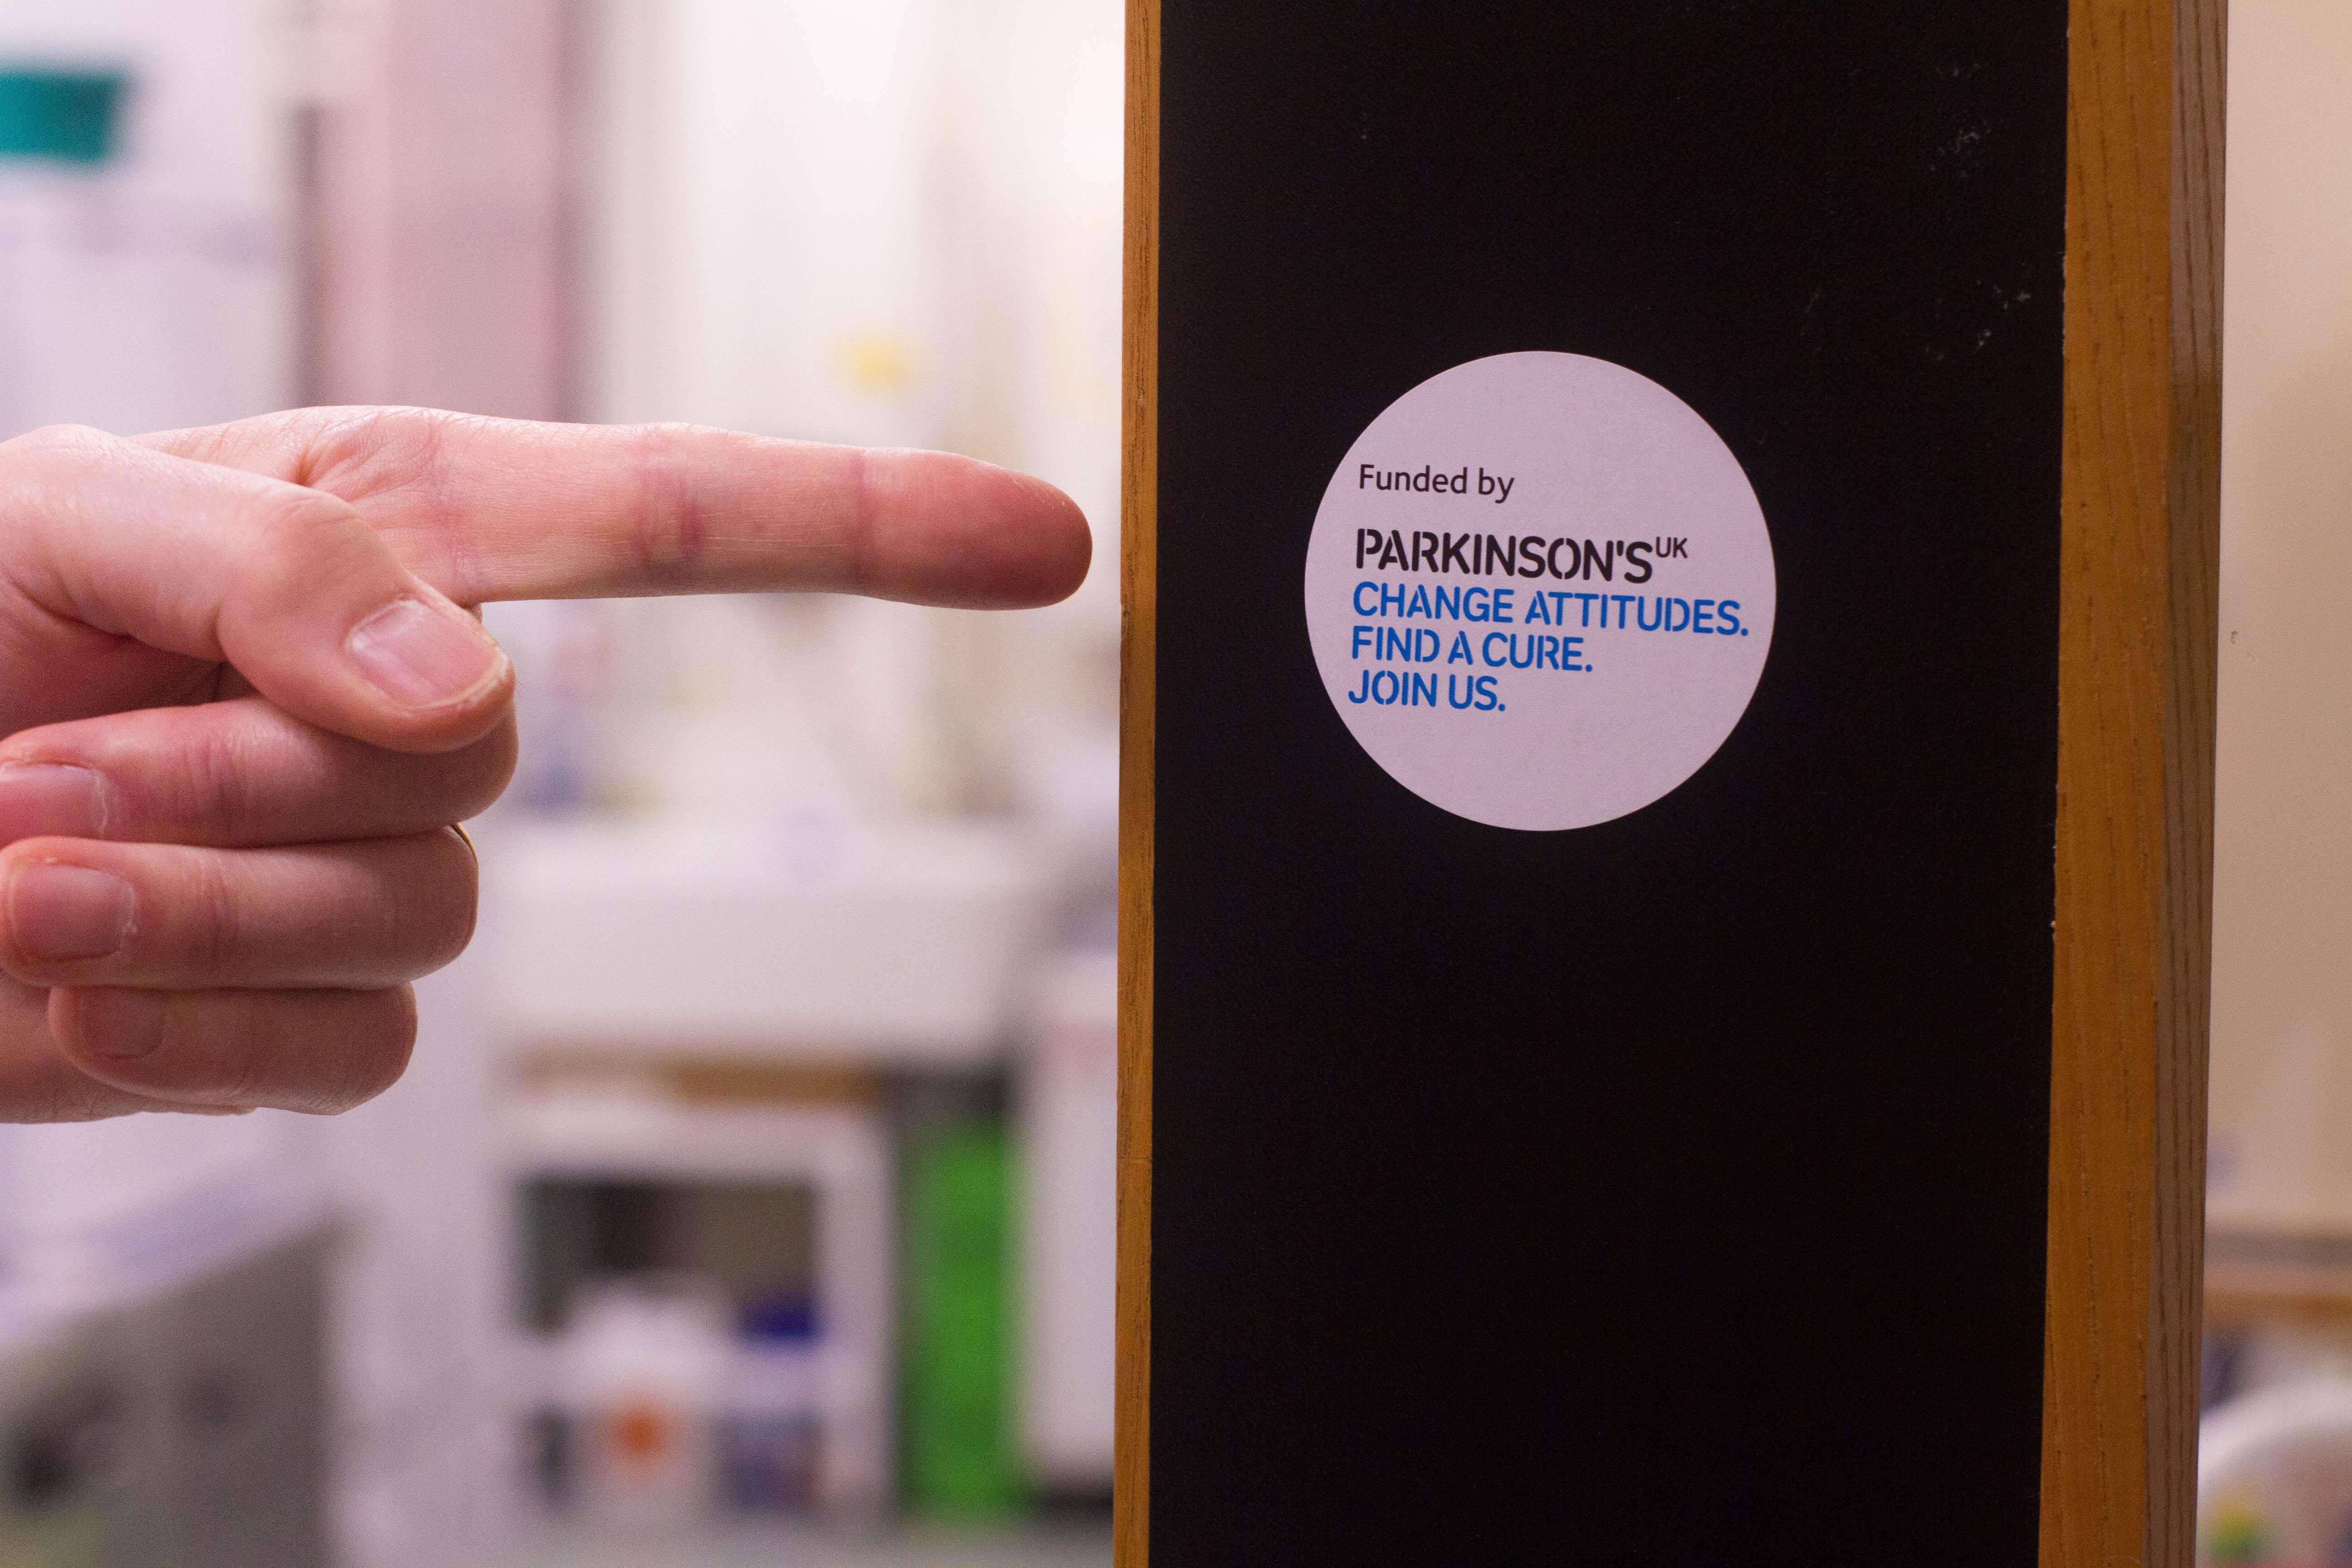 Unit research showcased in Parkinson’s UK latest fundraising appeal